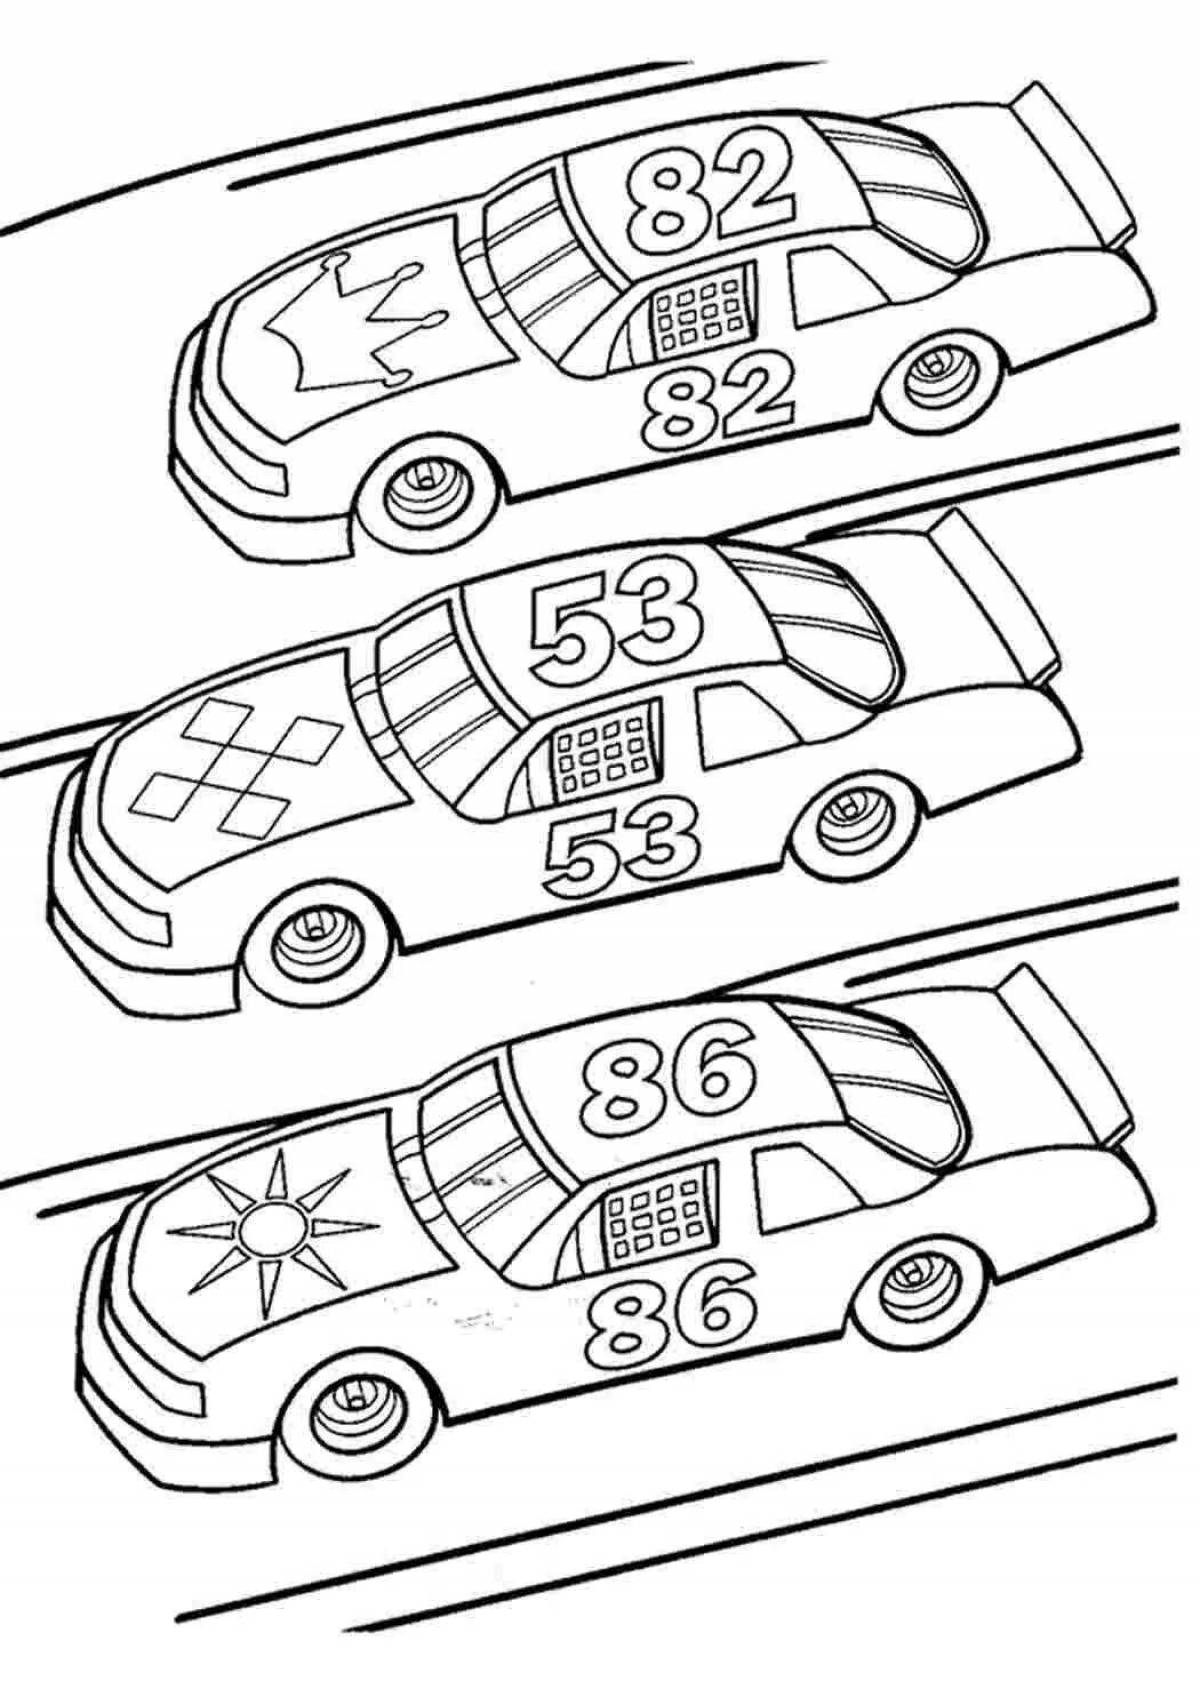 Coloring page with bright racing car